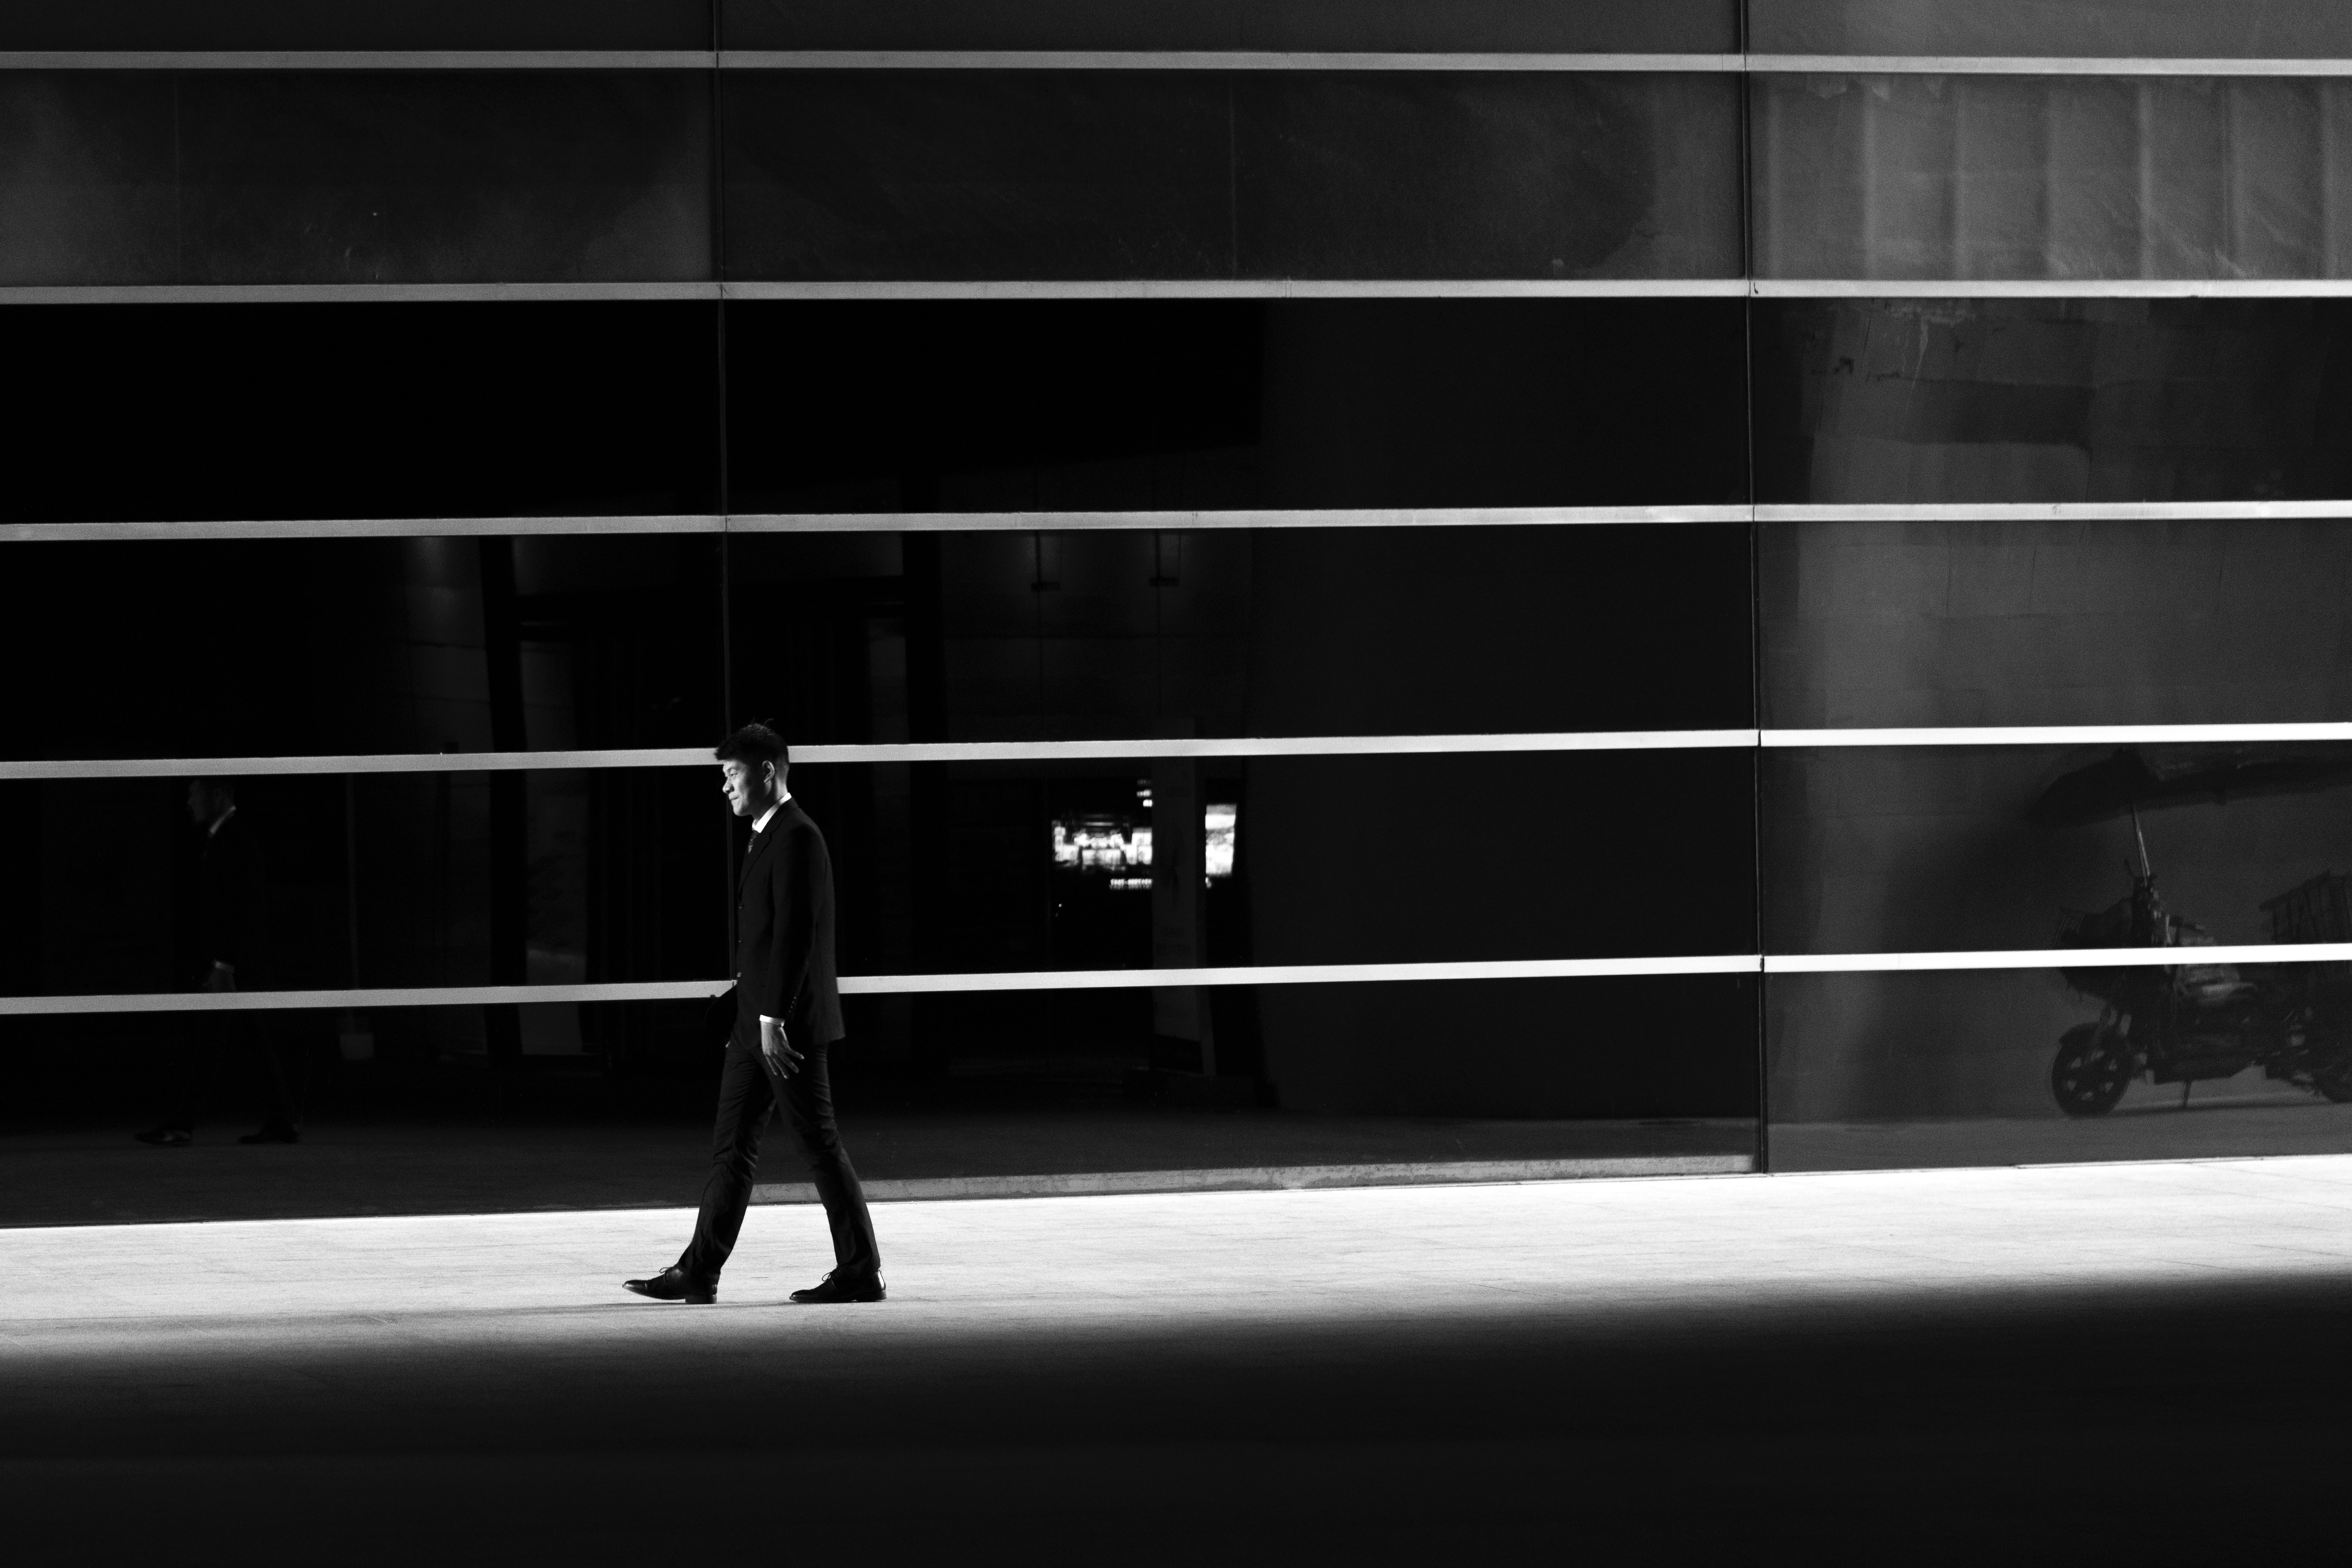 man in suit walking in front of building appearing to be in visual layers